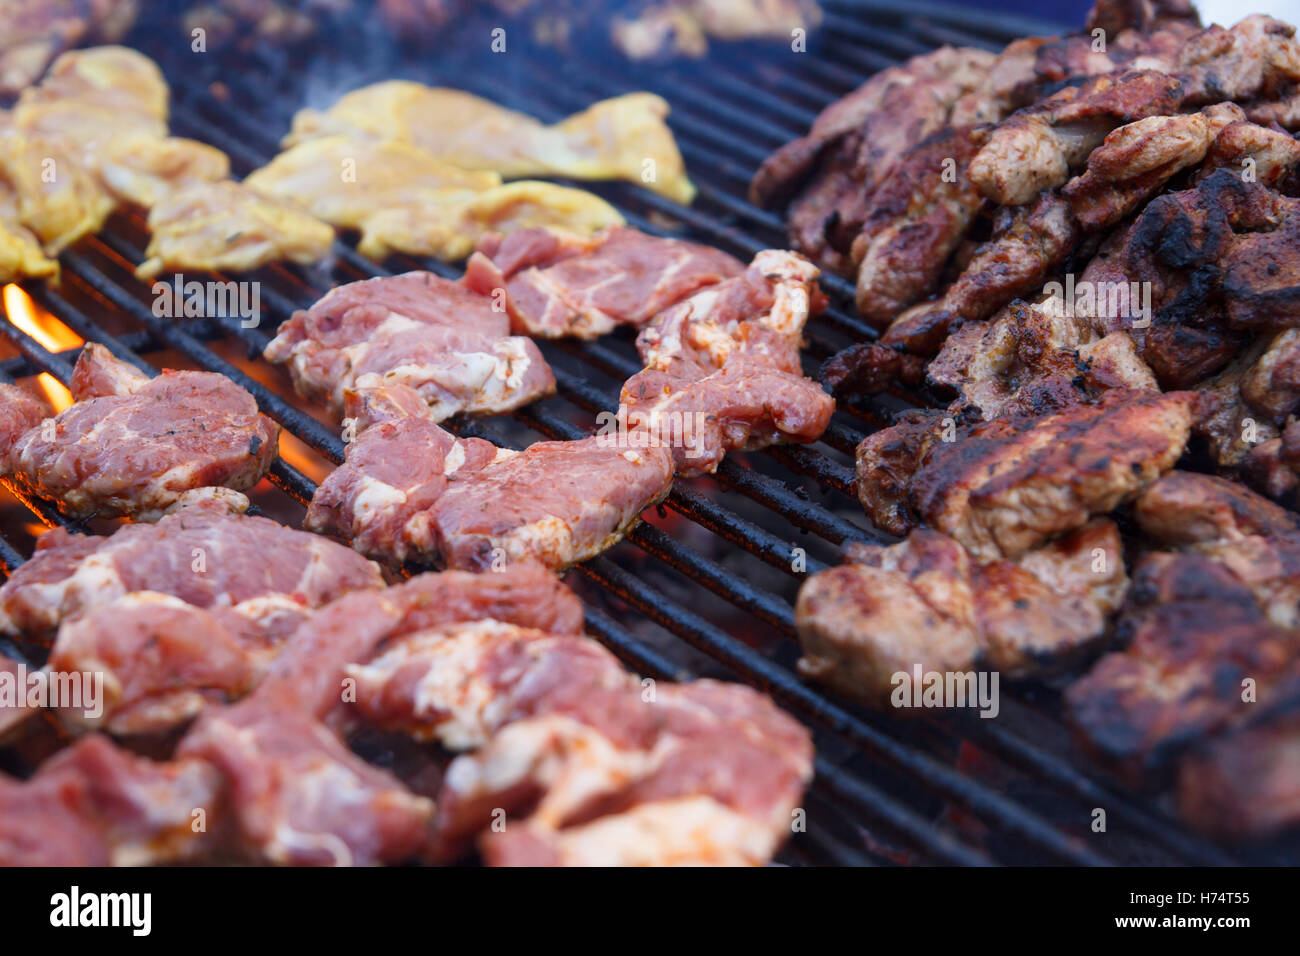 Many pieces of different kinds of meat grilling on a barbeque grill. Selective focus. Stock Photo